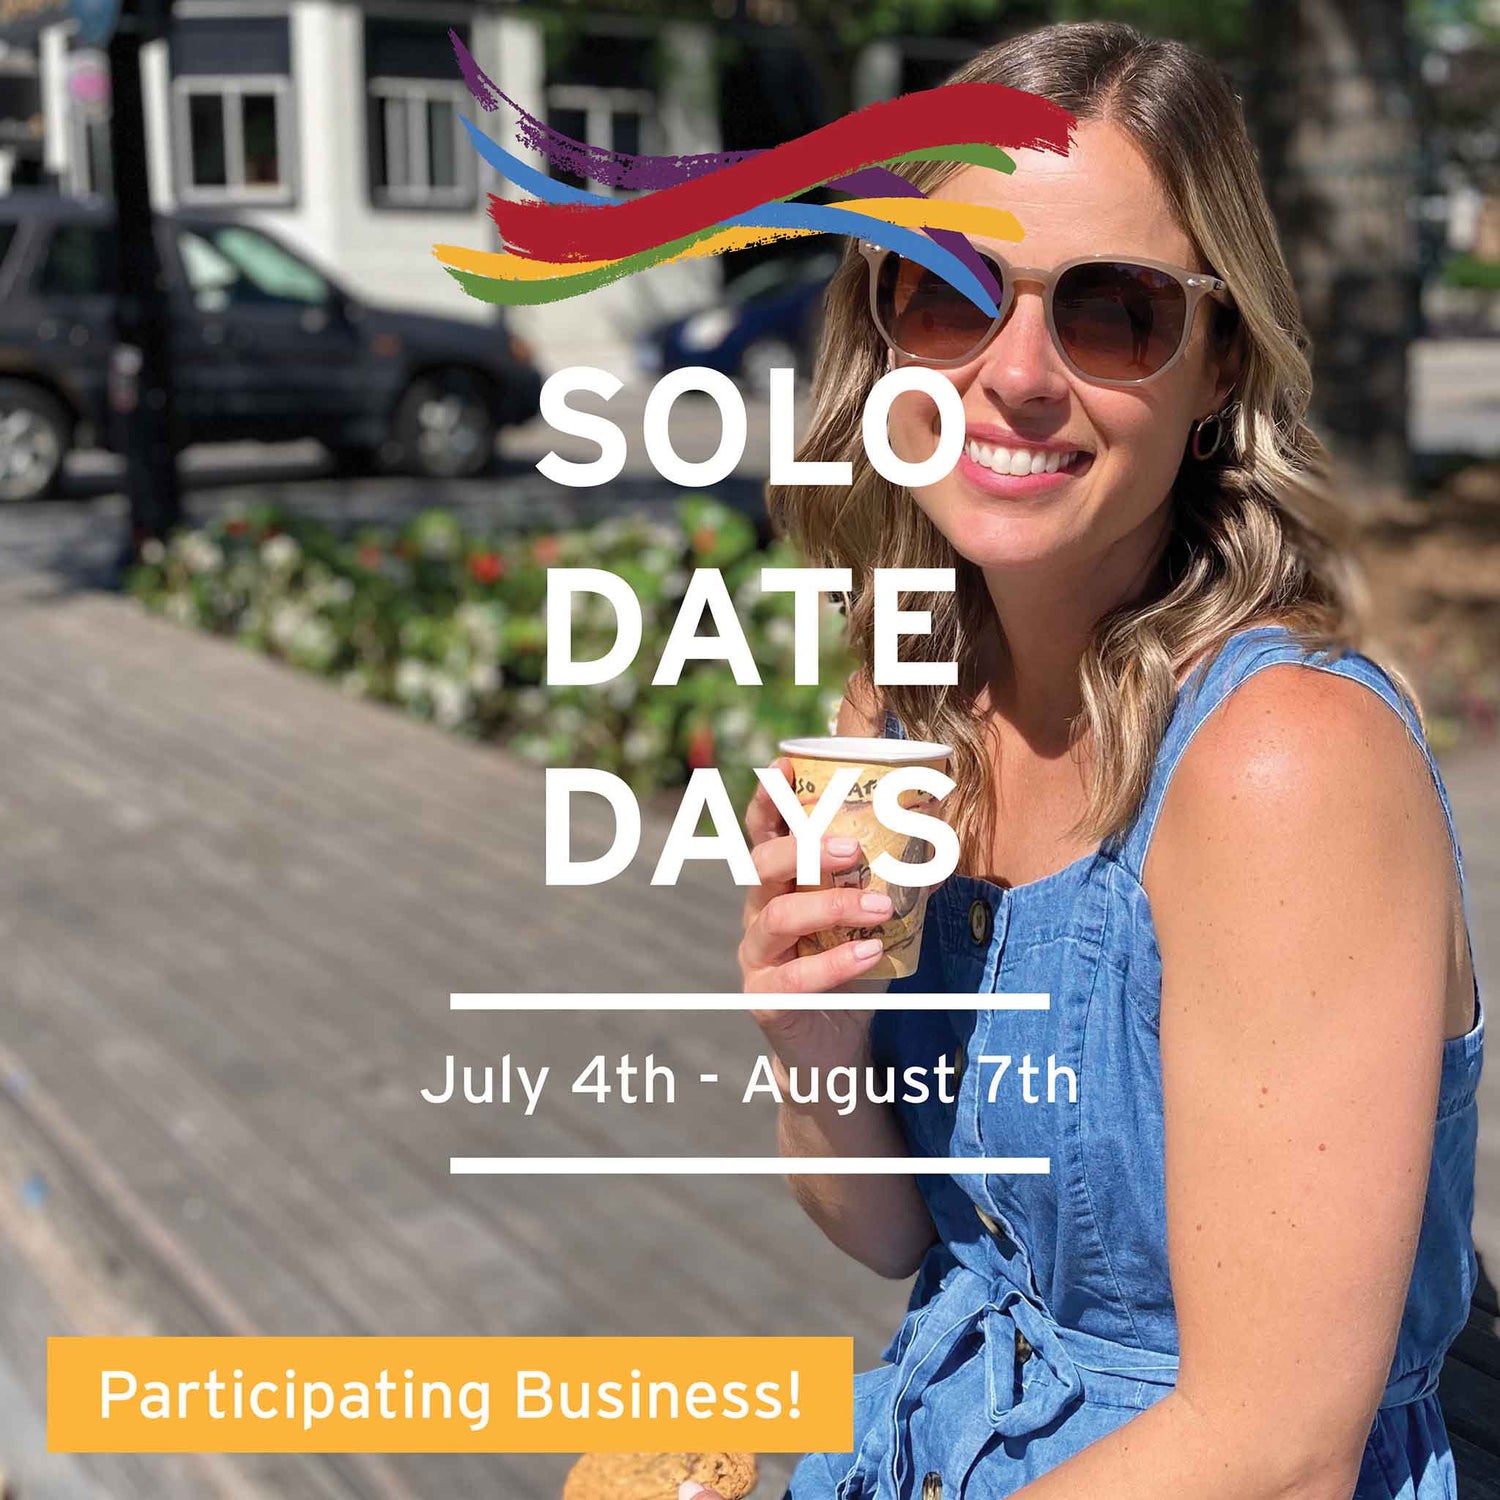 do+dare undie co. is a participating business in the downtown Burlington Solo Data Days event from July 4th to August 7th